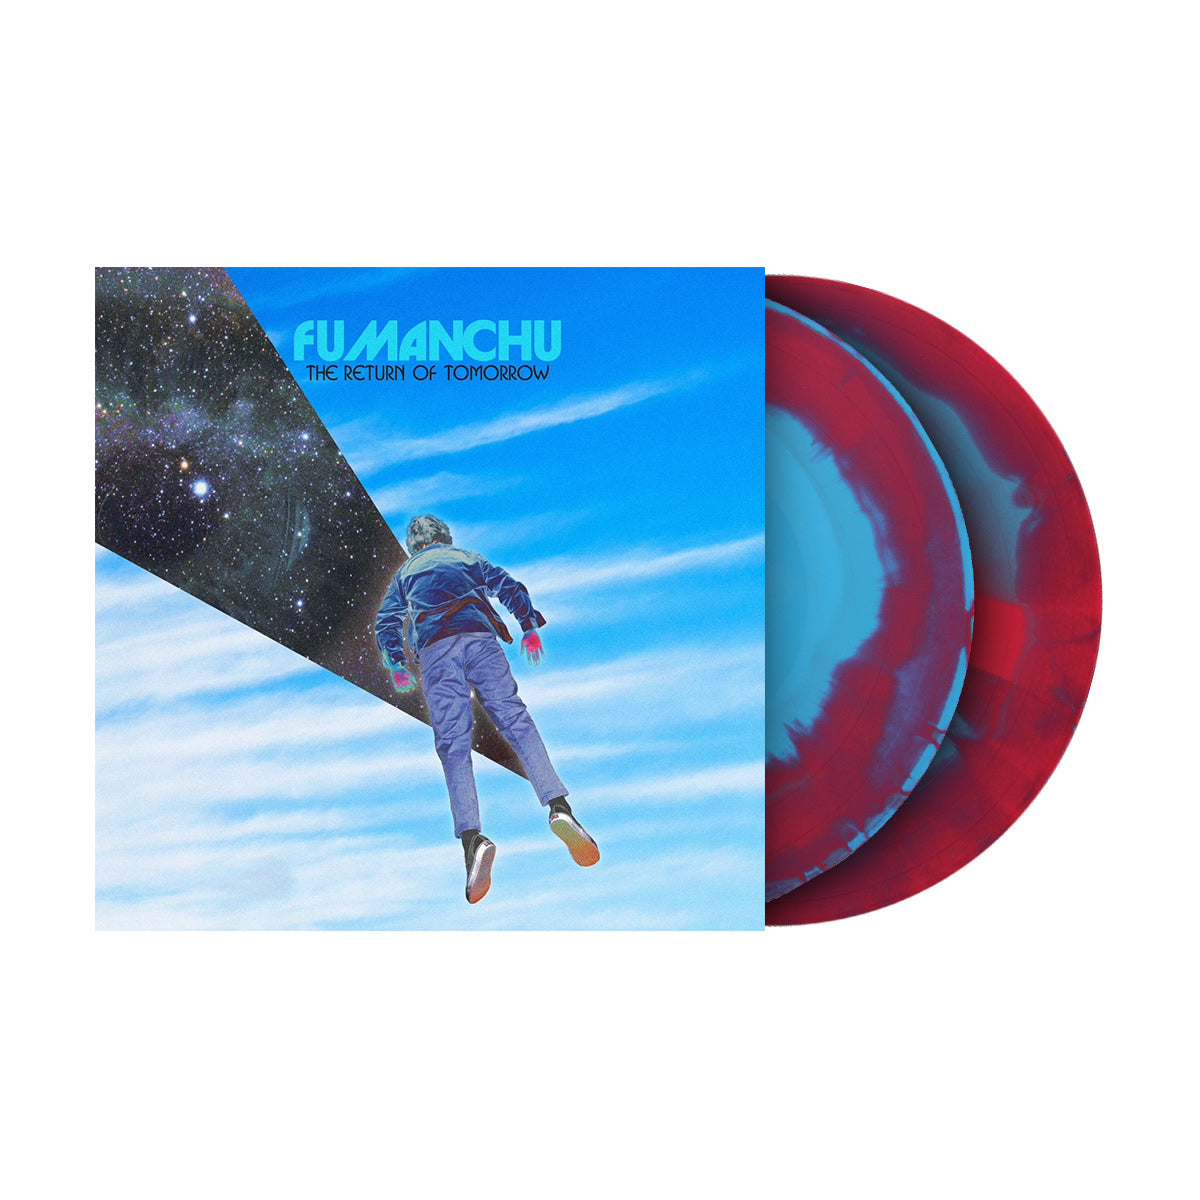 FU MANCHU ‘THE RETURN OF TOMORROW’ 2LP (Limited Edition — Only 300 Made, Blue & Magenta A-Side/B-Side Vinyl)